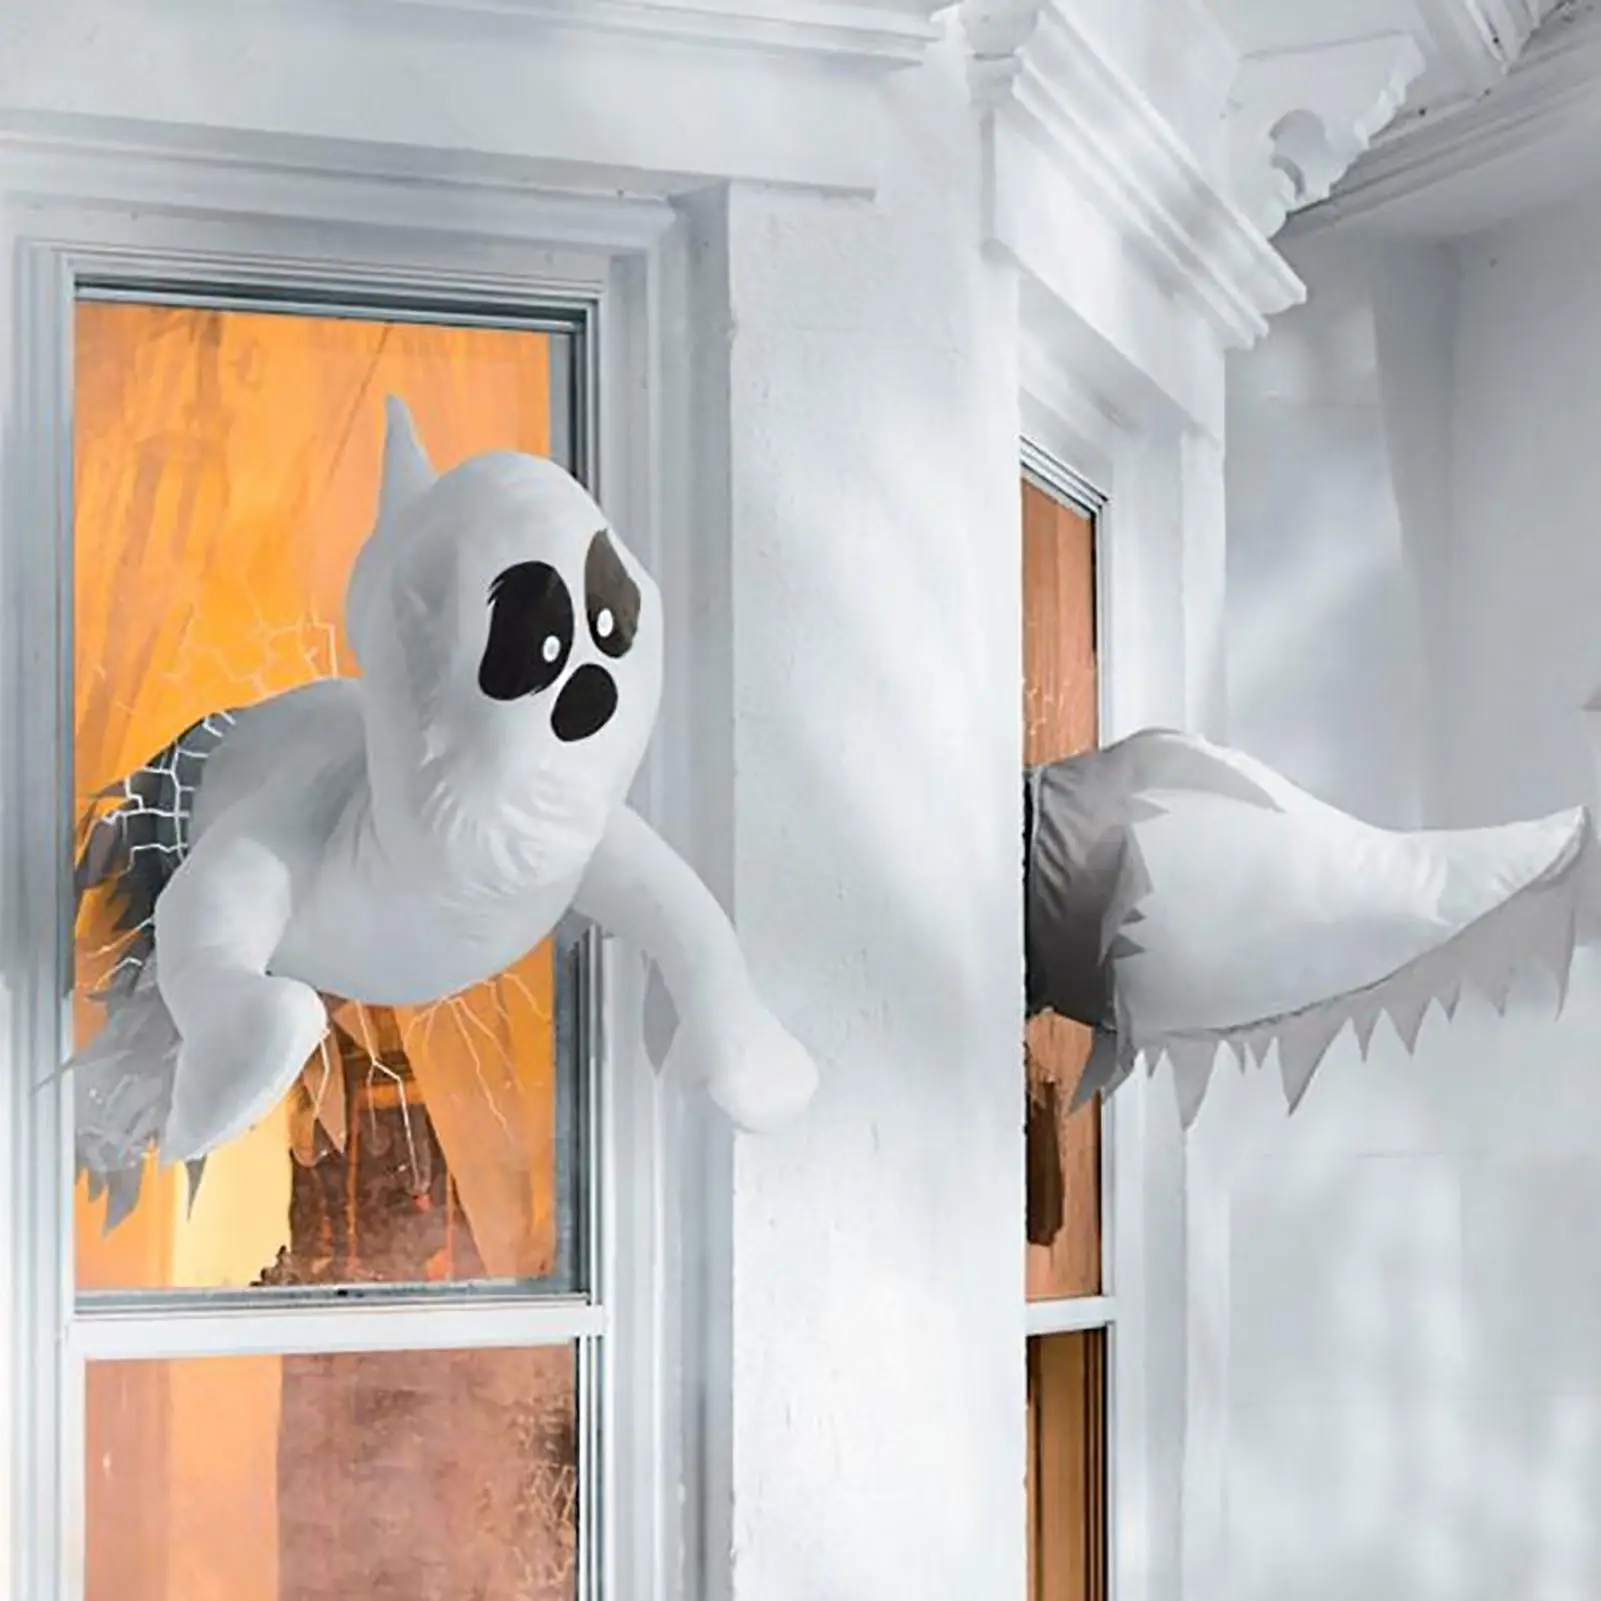 

Funny Angry ghost Plush toys Window Crasher Ghosts Cute Halloween Ghost Horror Scary Ghost for Window Halloween Decorations